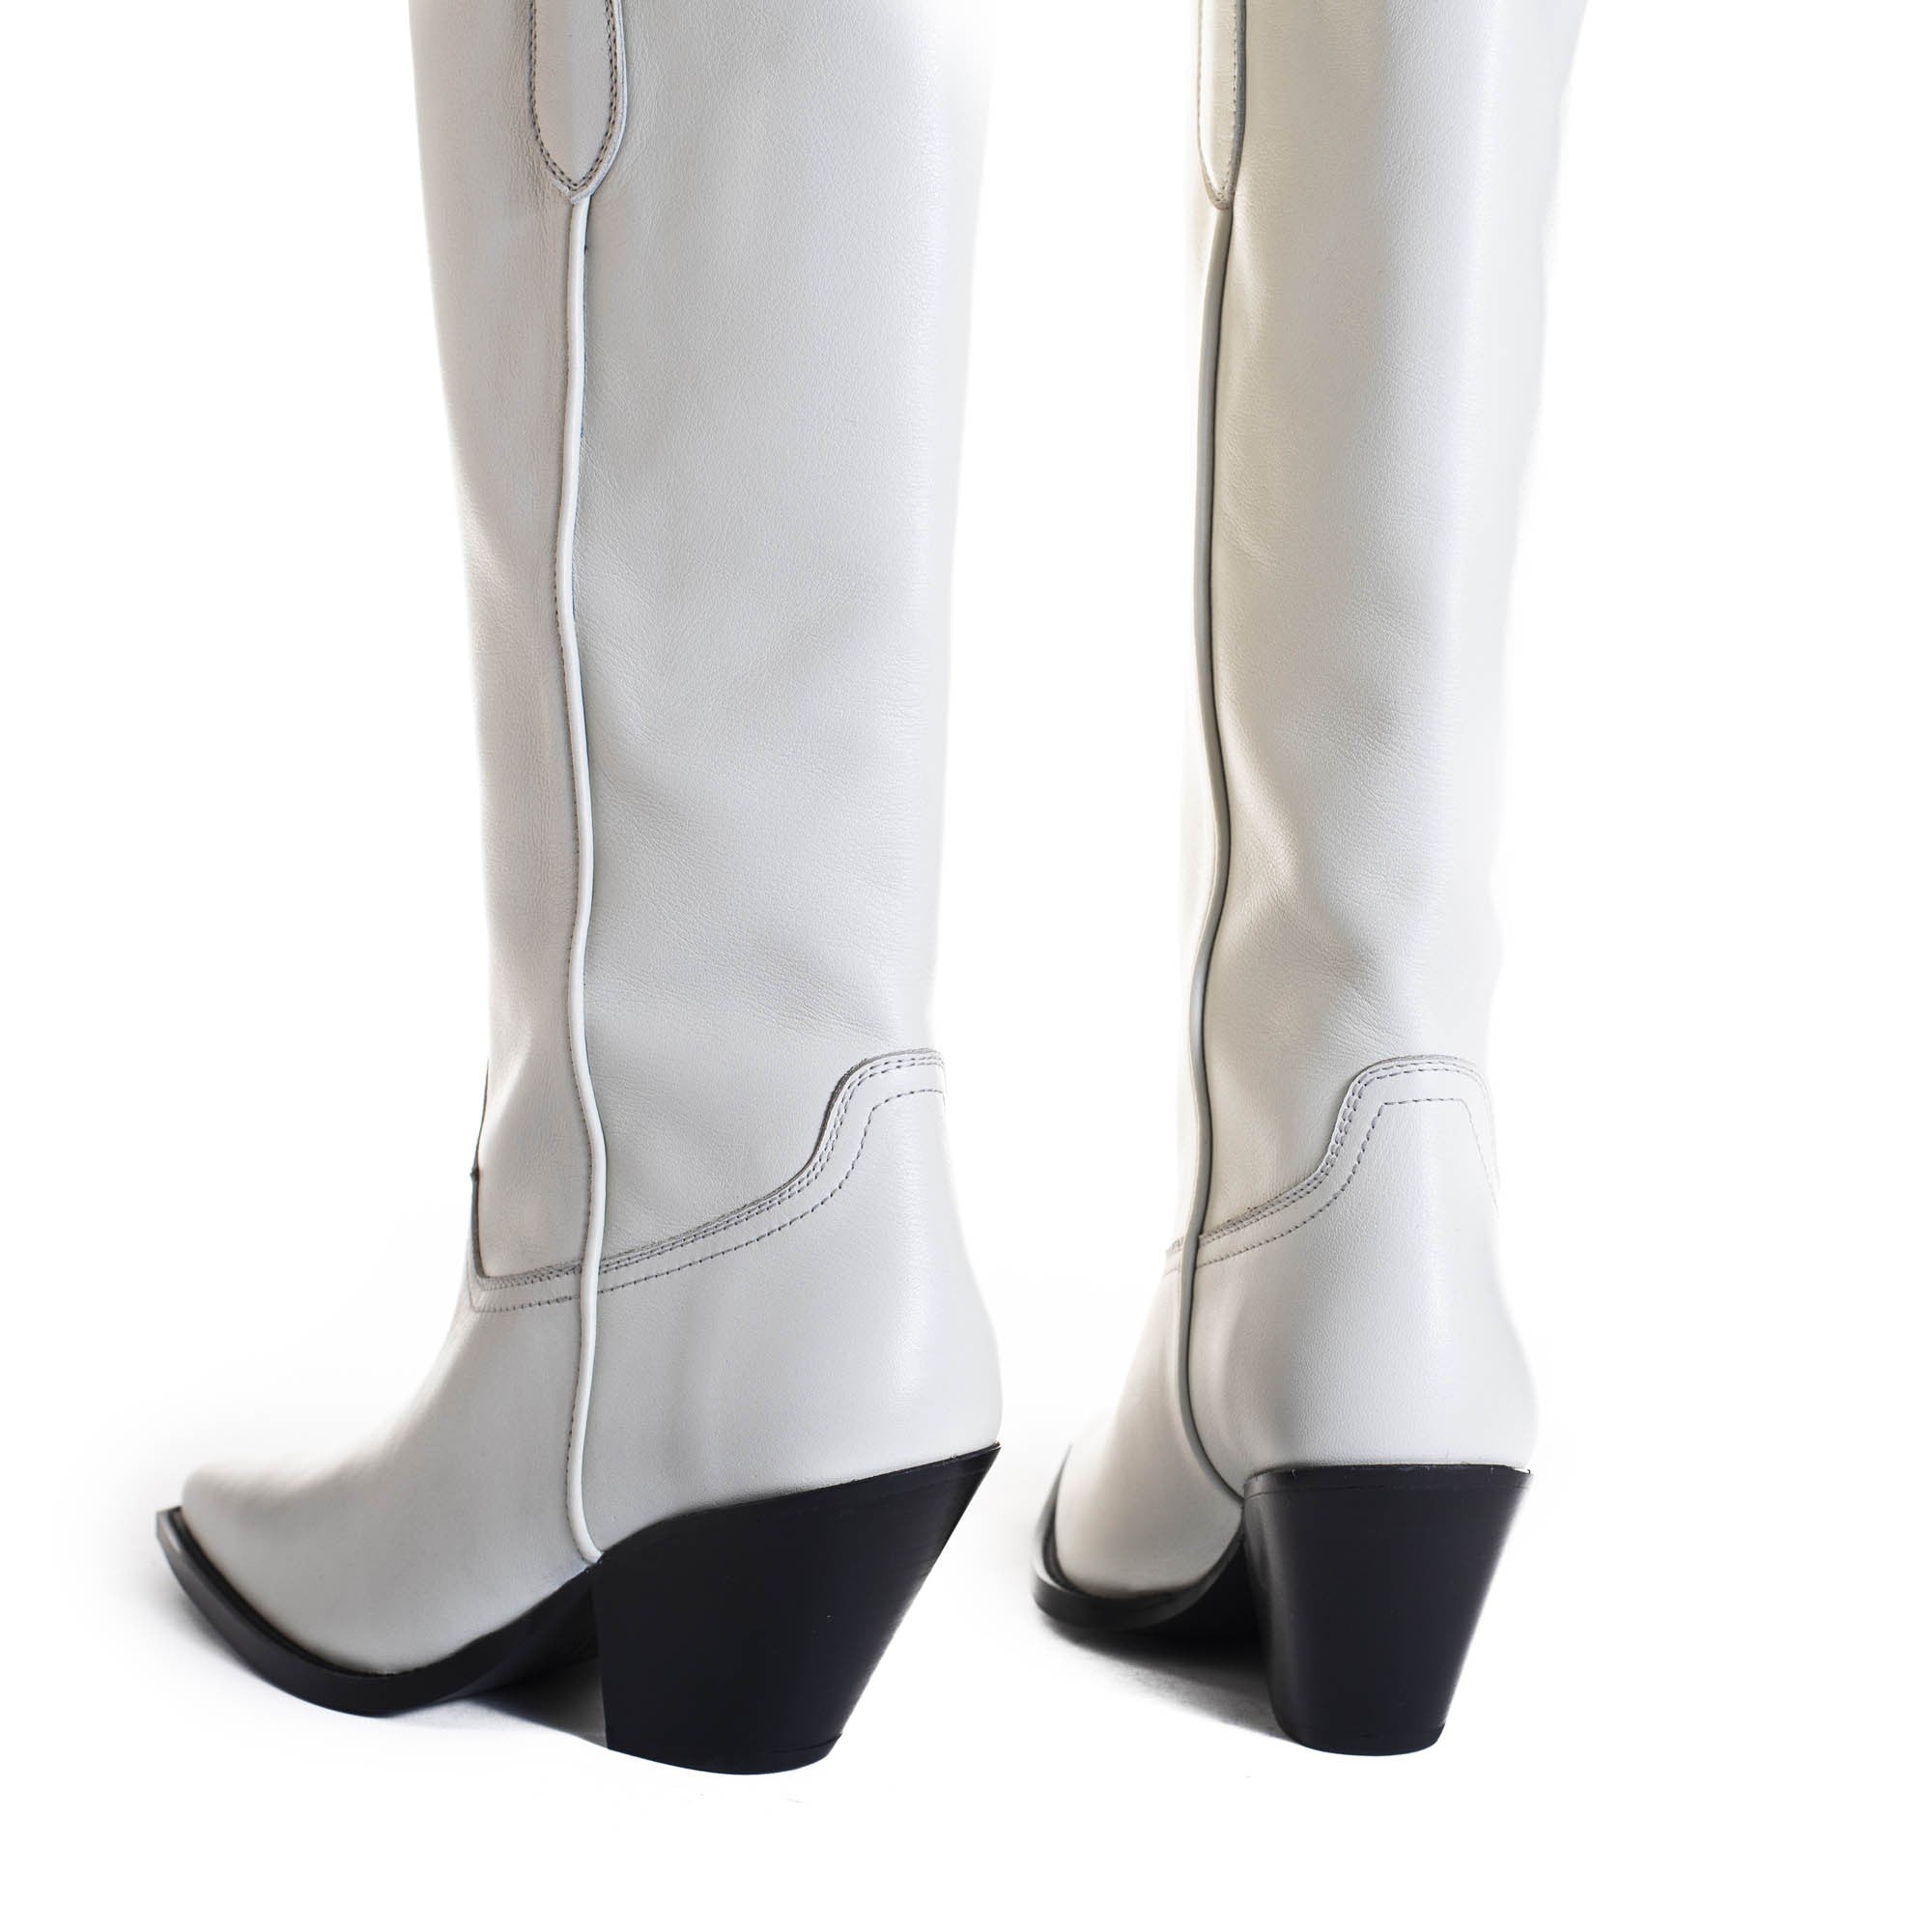 TORAL OFF-WHITE LEATHER KNEE-HIGH BOOTS (6942854905996)